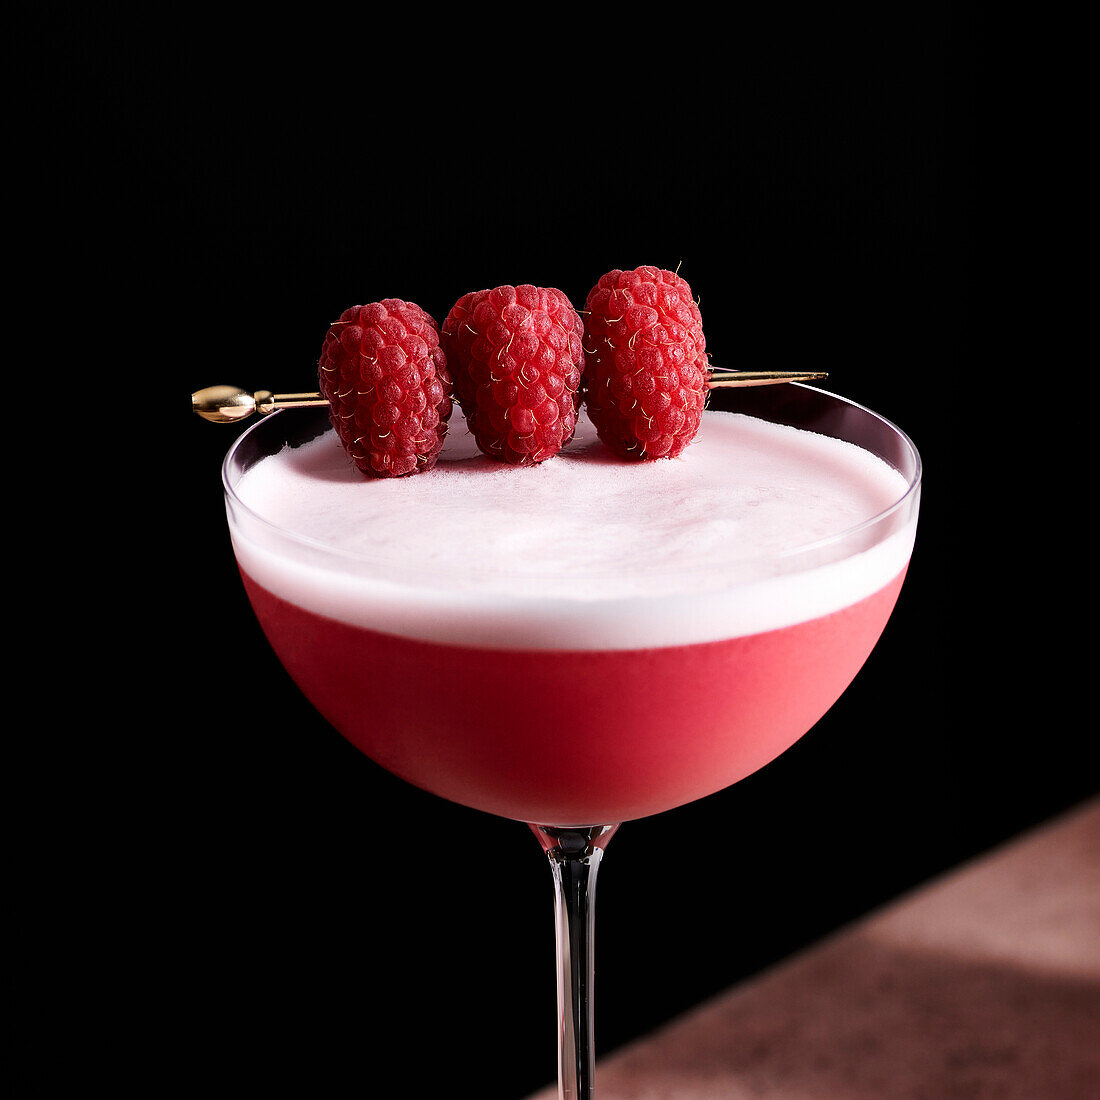 Clover Club cocktail in a tall coupe glass, garnished with three raspberries on a golden pick